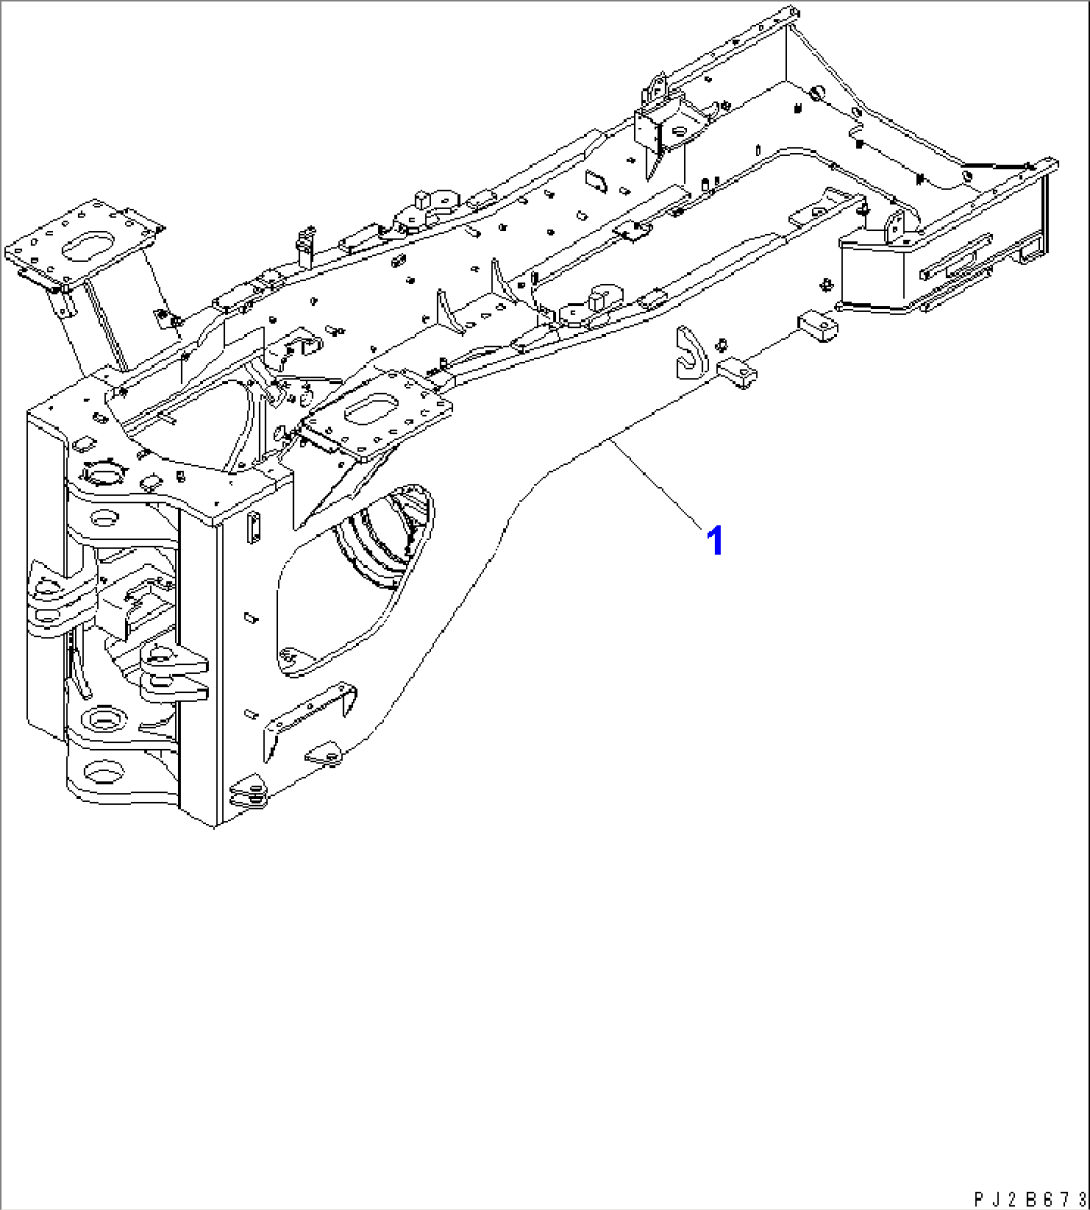 REAR FRAME (WITH WATER SEPARATOR)(#50001-51074)